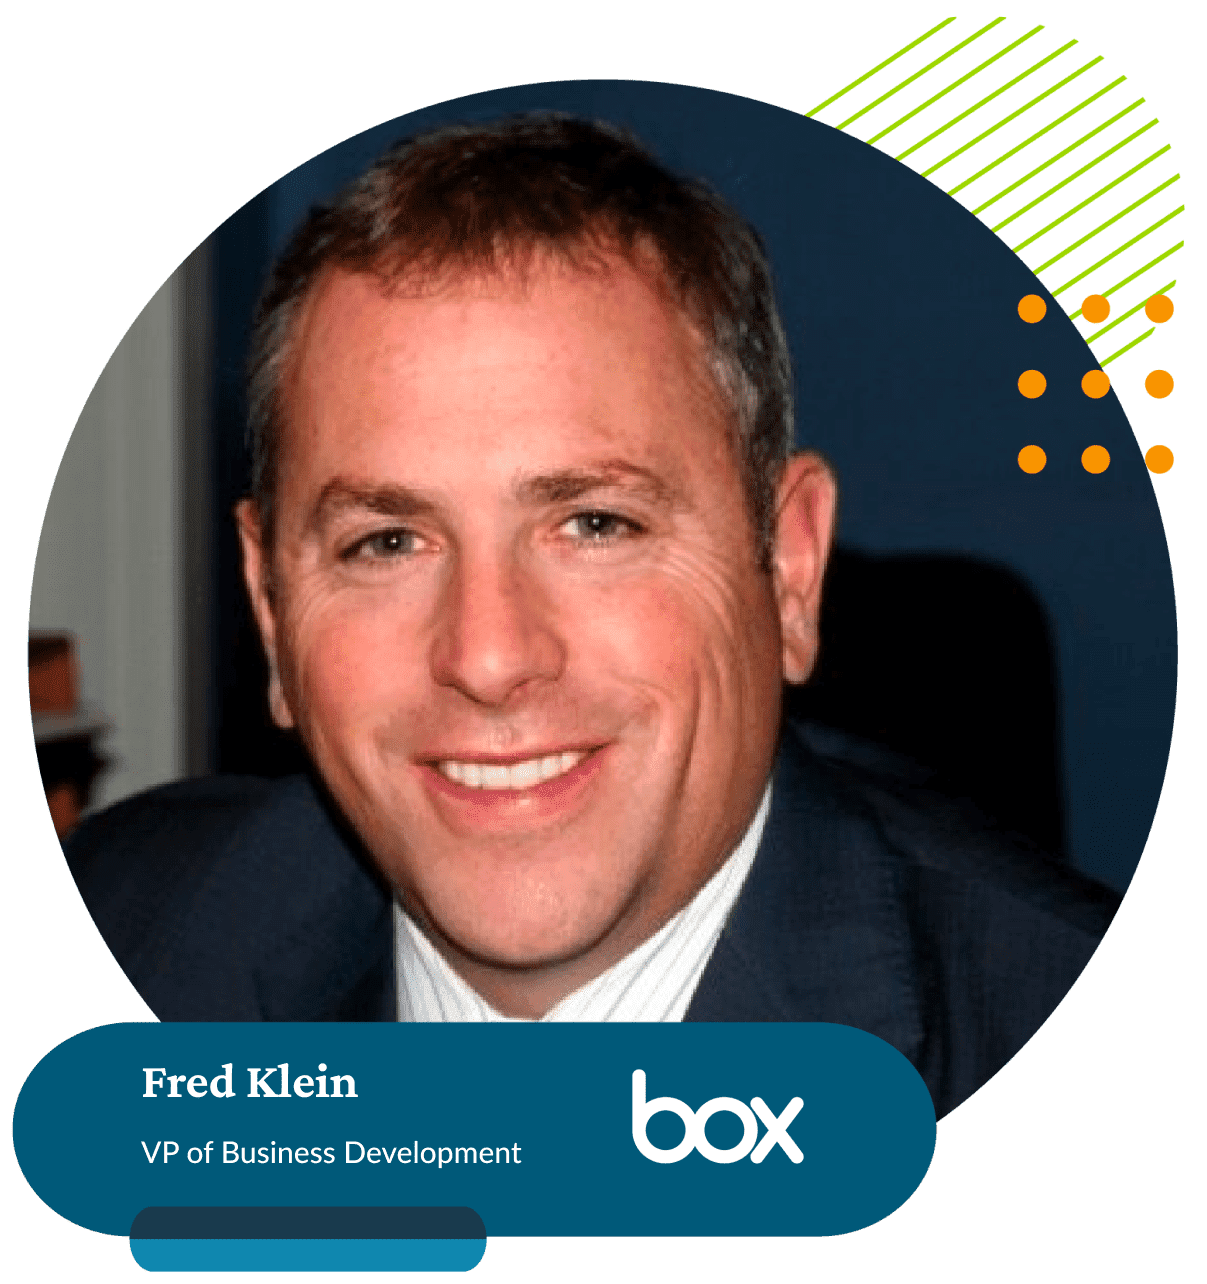 “In today’s environment, the need for organizations to move quickly and operate in a modern way is more important than ever before.  With Box joining the Productiv Partner Network, we are empowering customers to reach their full potential by leveraging analytics to drive adoption of Box products enabling secure and centralized management of data in the cloud.”